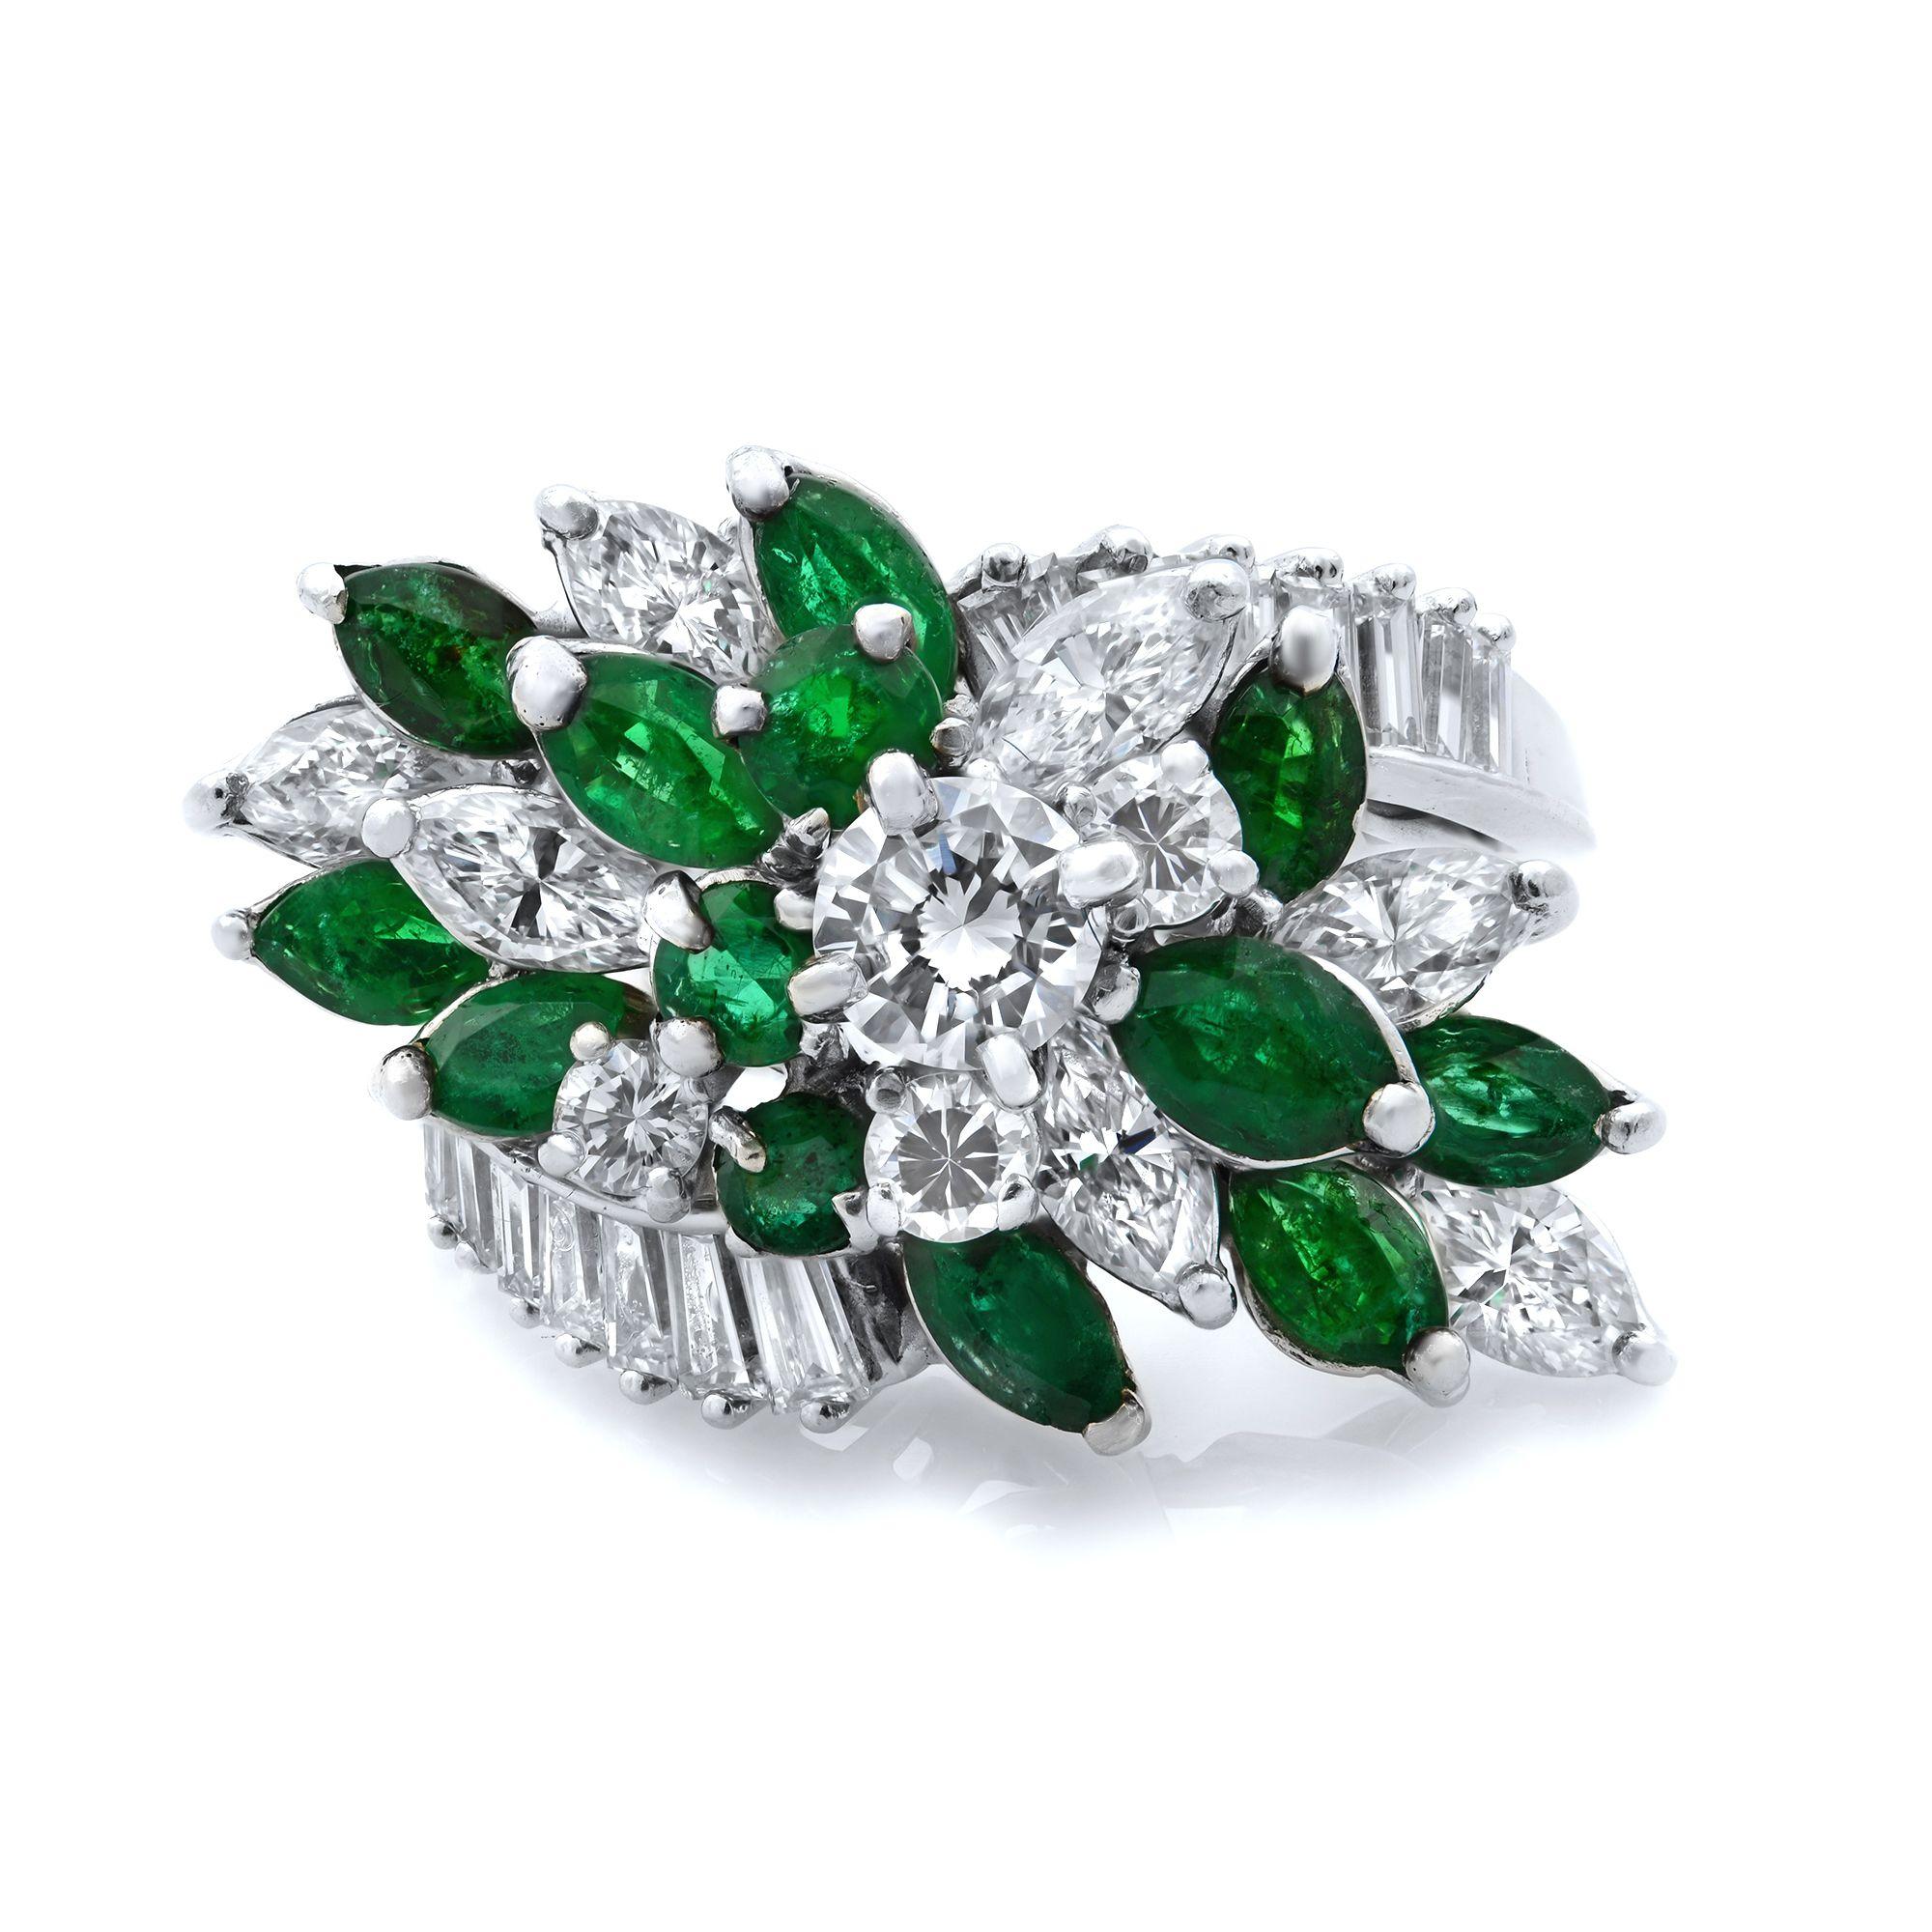 This beautiful antique style cocktail ring is set with white round, marquise and baguette cut diamonds mixed with green marquise cut emeralds. The ring is perfect for any occasion which demands trend. Crafted in platinum. Ring size 7.  Main stone: